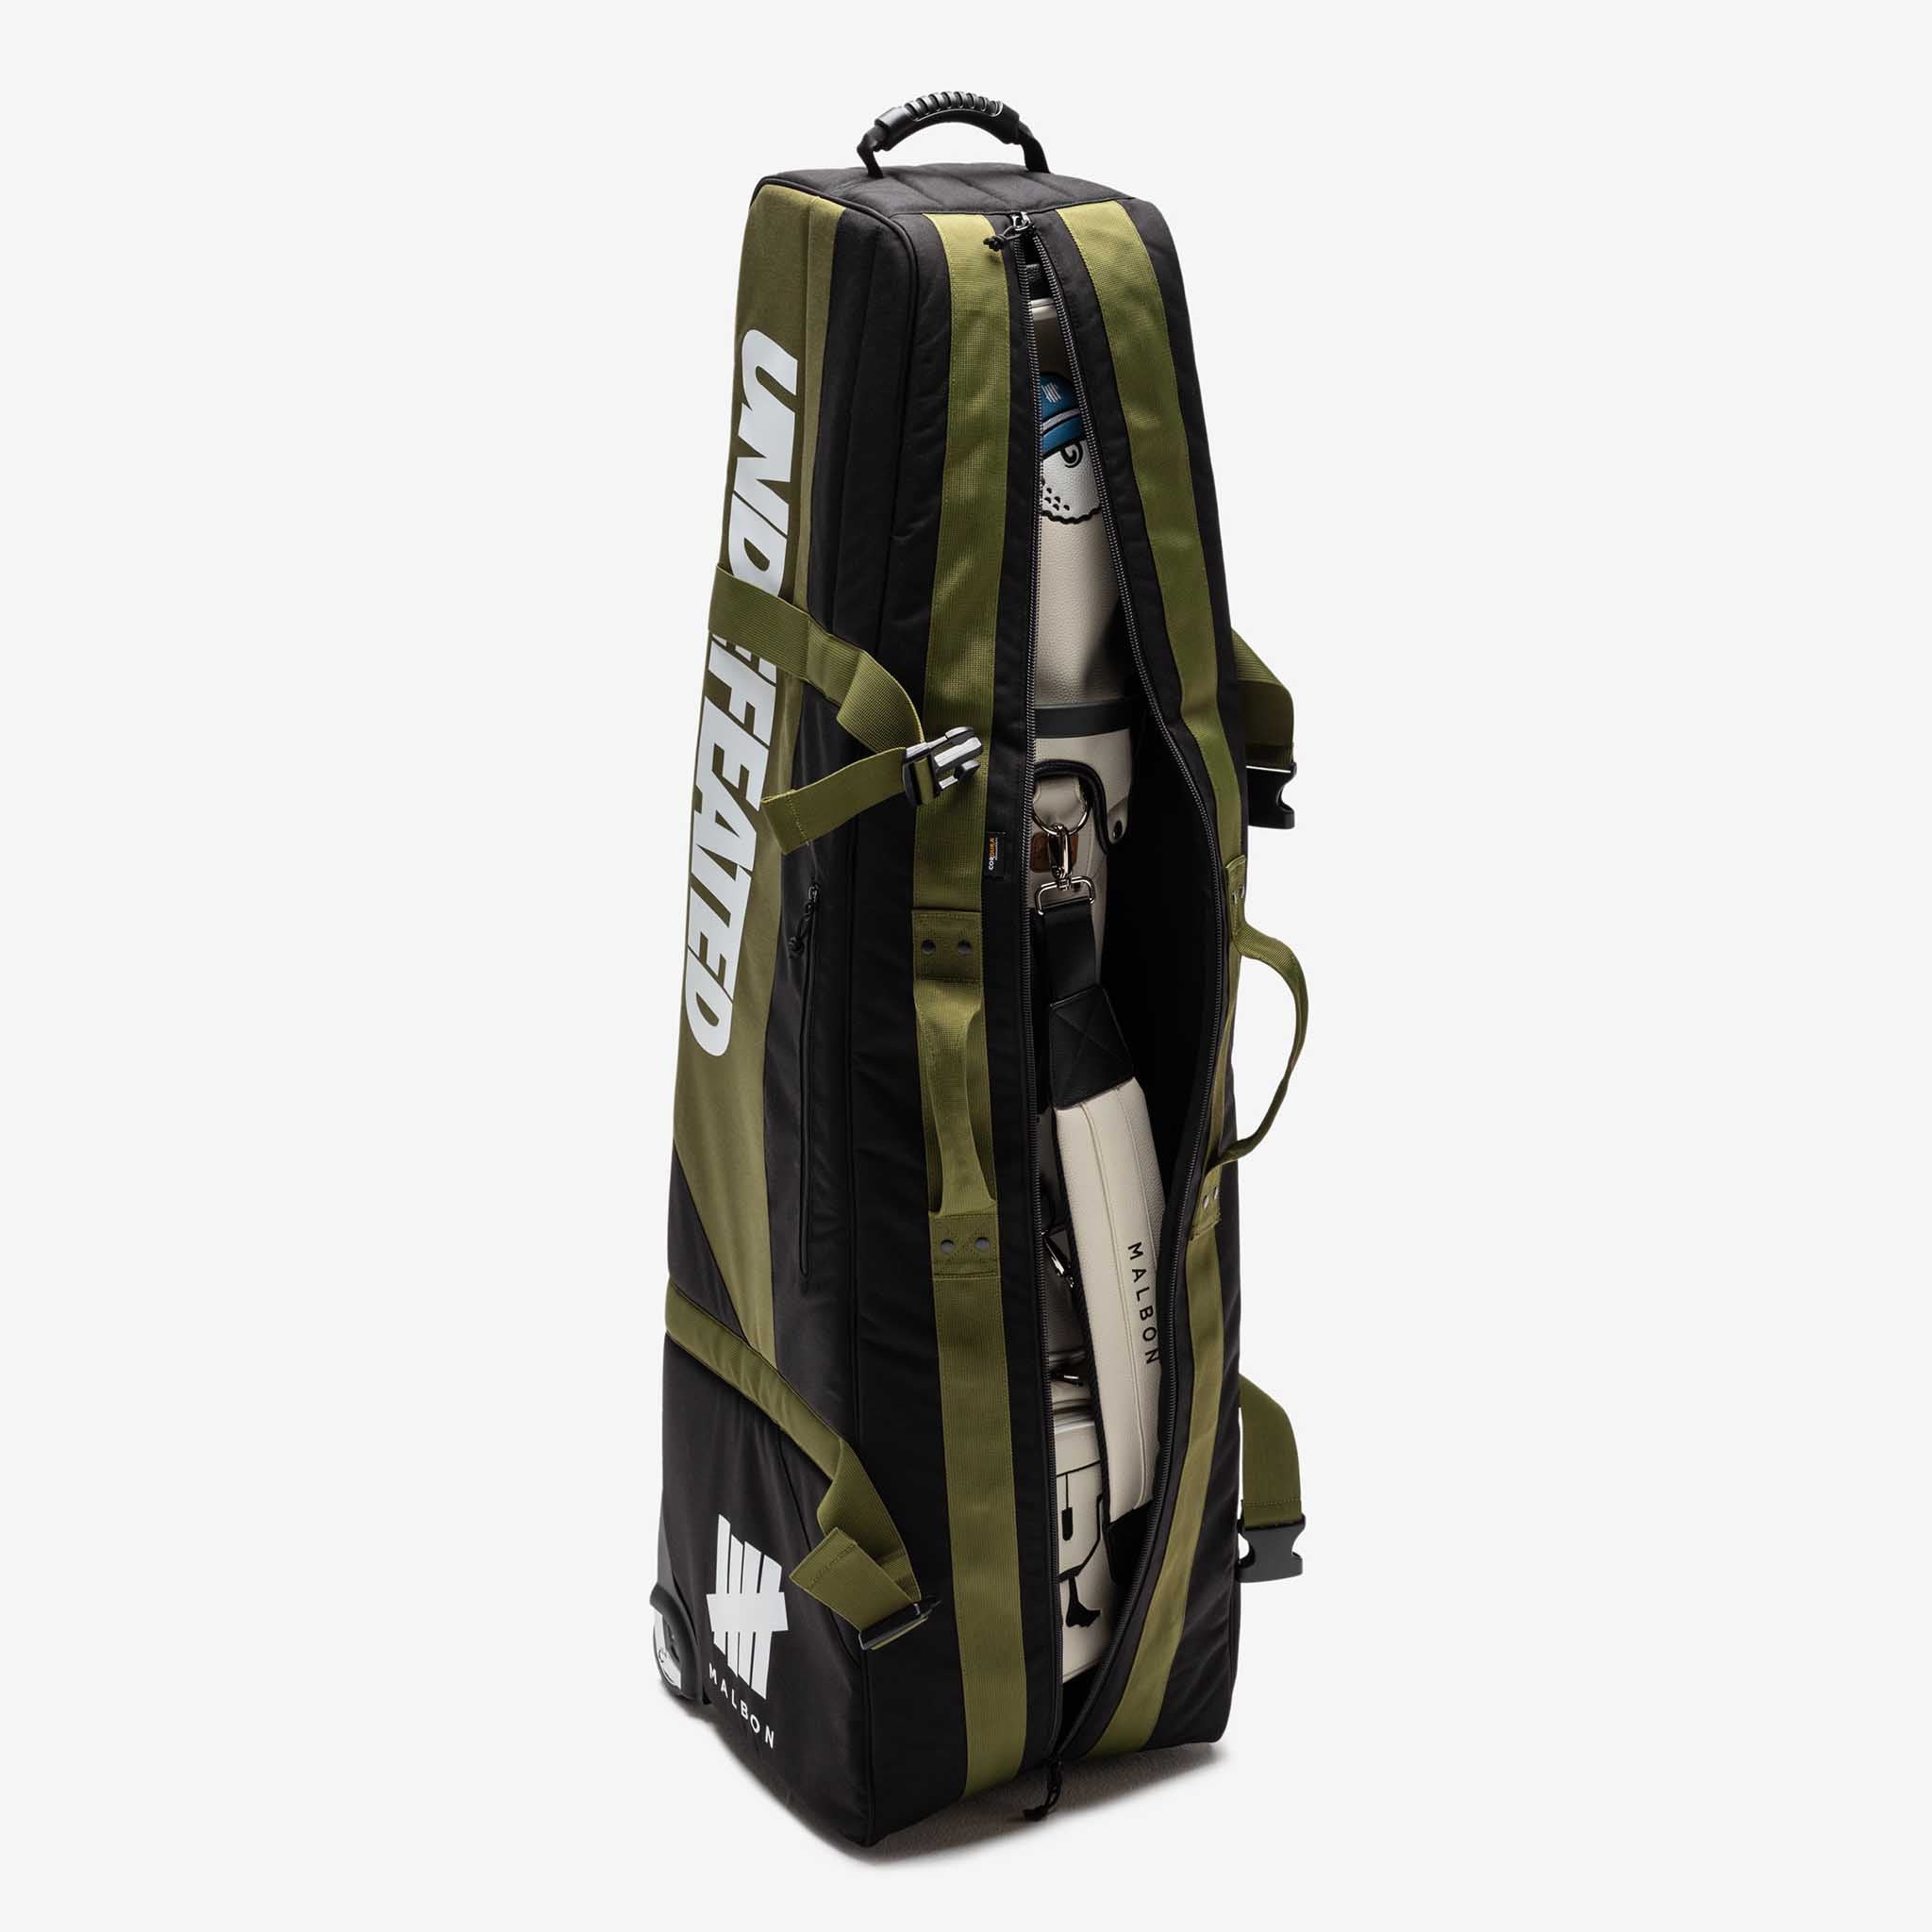 UNDEFEATED x Malbon The UNDEFEATED x Malbon Stand Golf Bag is available in  black and sand. It features multiple zippered pockets, a…